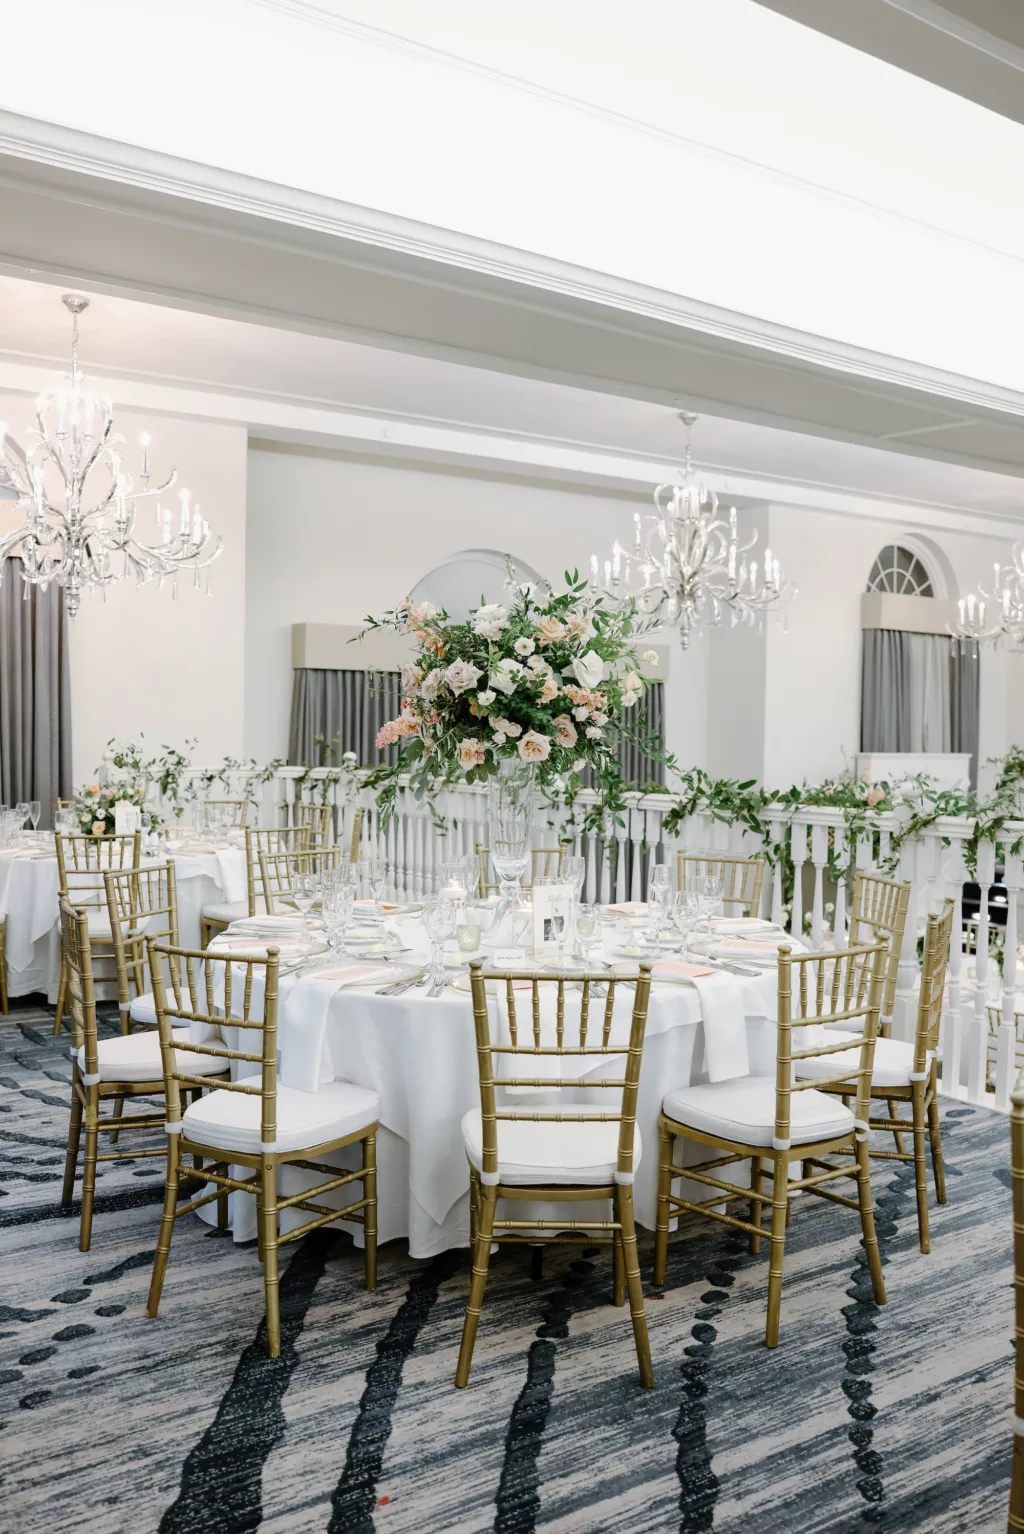 White and Gold Grand Ballroom Wedding Reception Ideas | Gold Chiavari Chair | Tall Flower Stand with White and Pink Roses, and Greenery Centerpiece Decor Inspiration